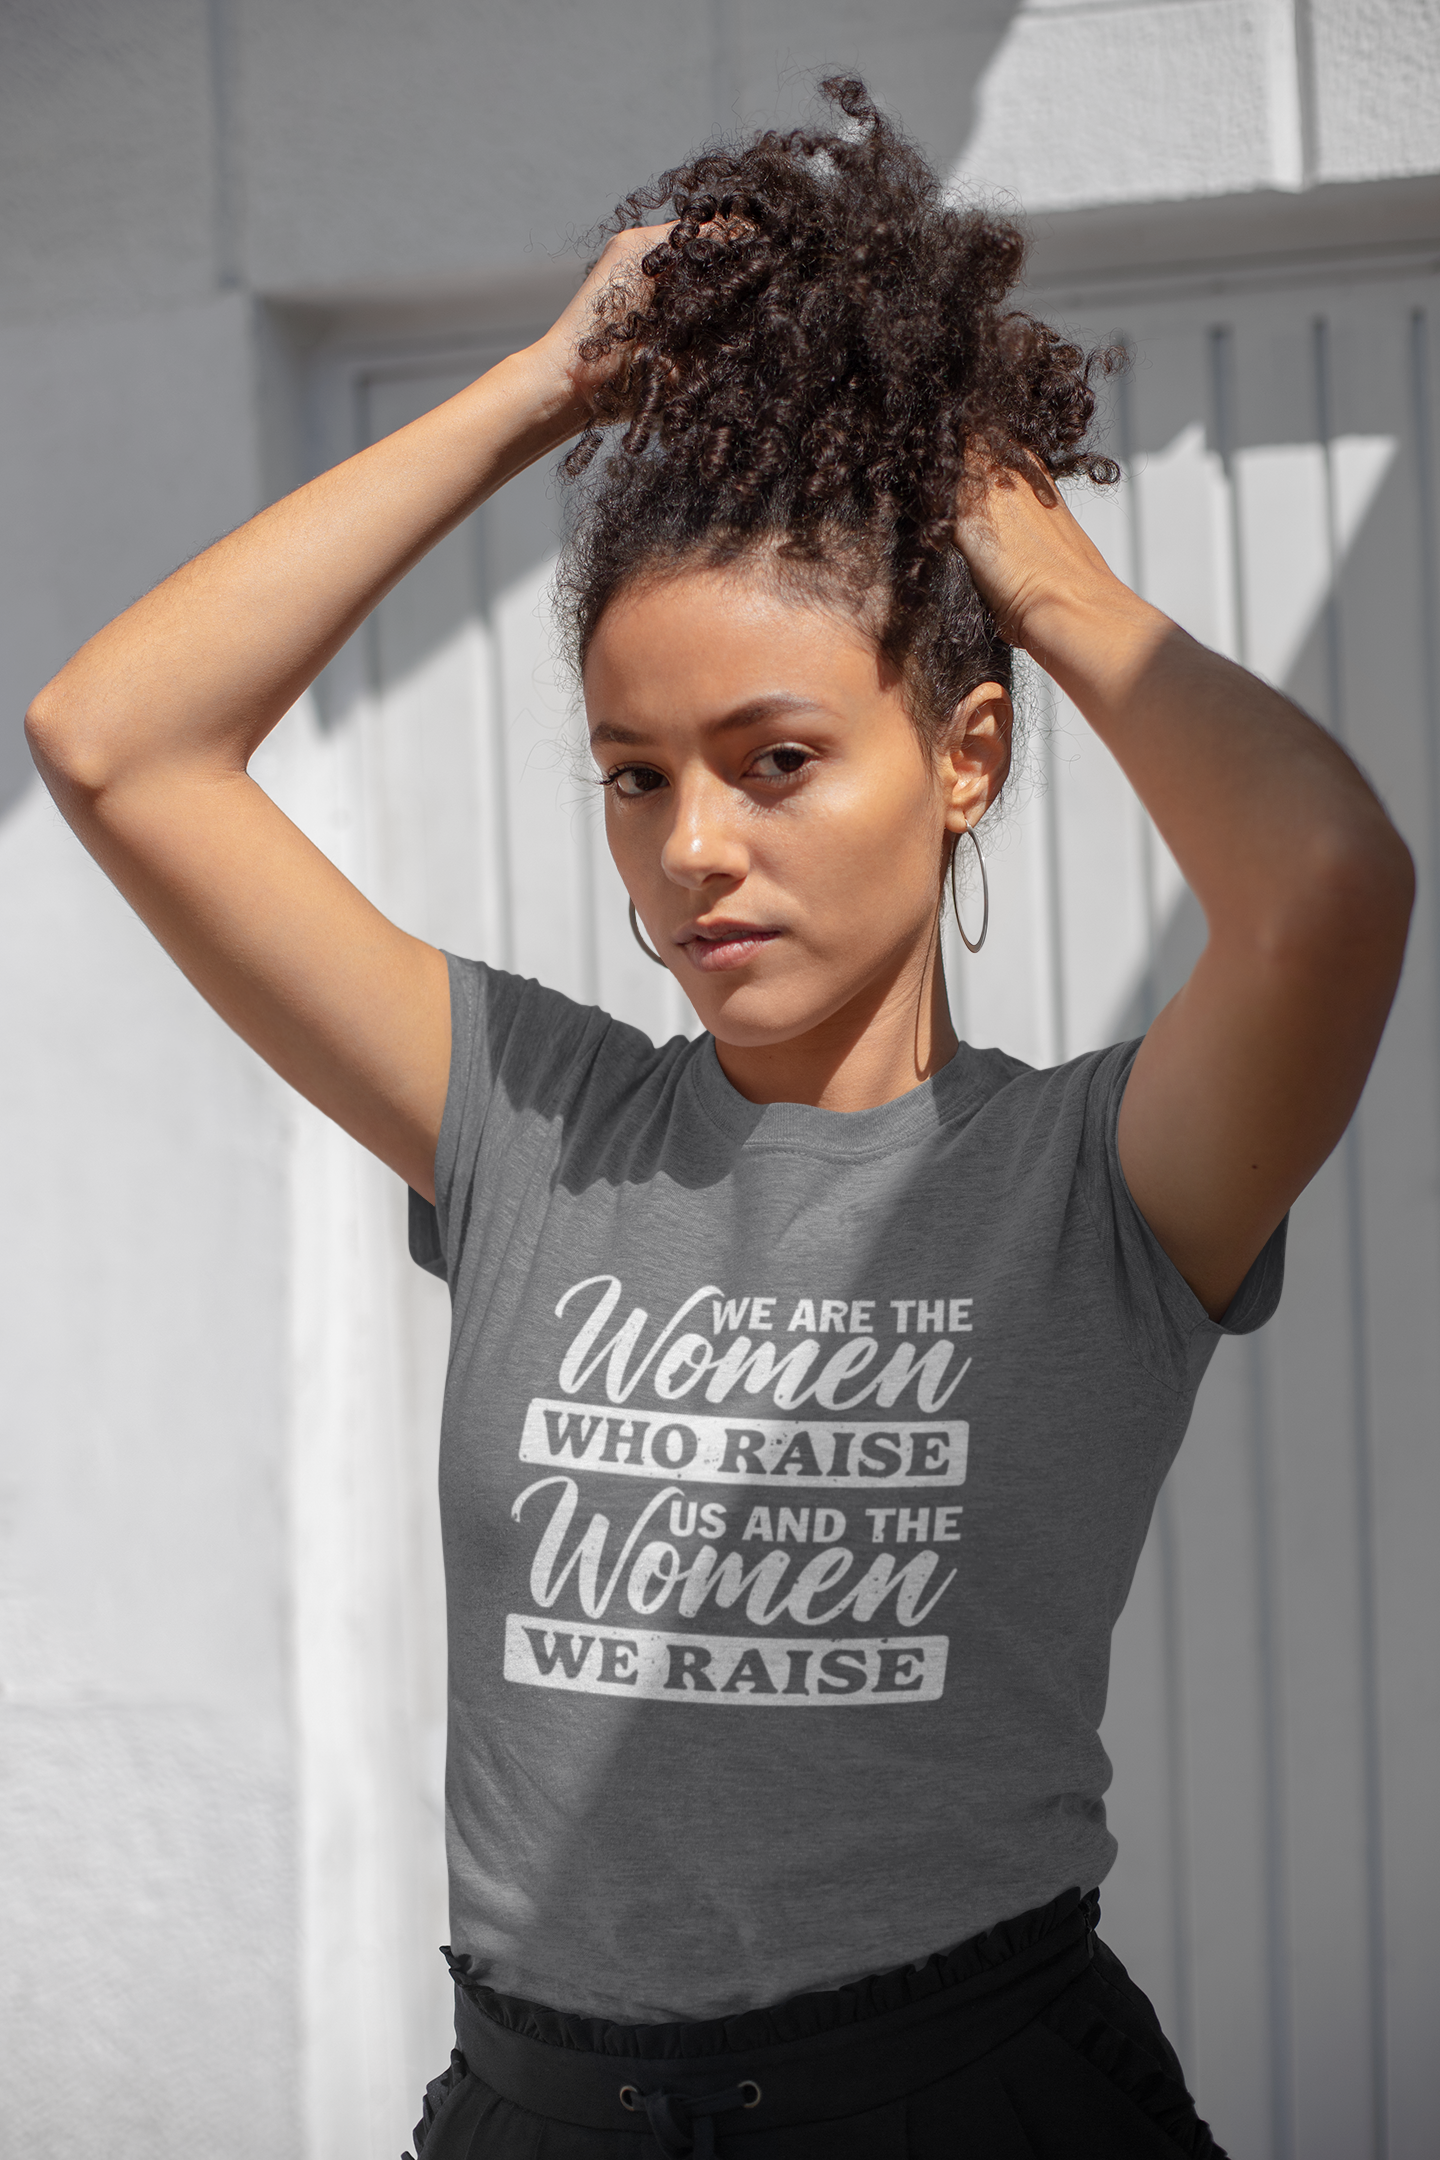 We are the Women Who Raise Us T-Shirt - Women Empowerment T-Shirts & Apparel | CP Designs Unlimited